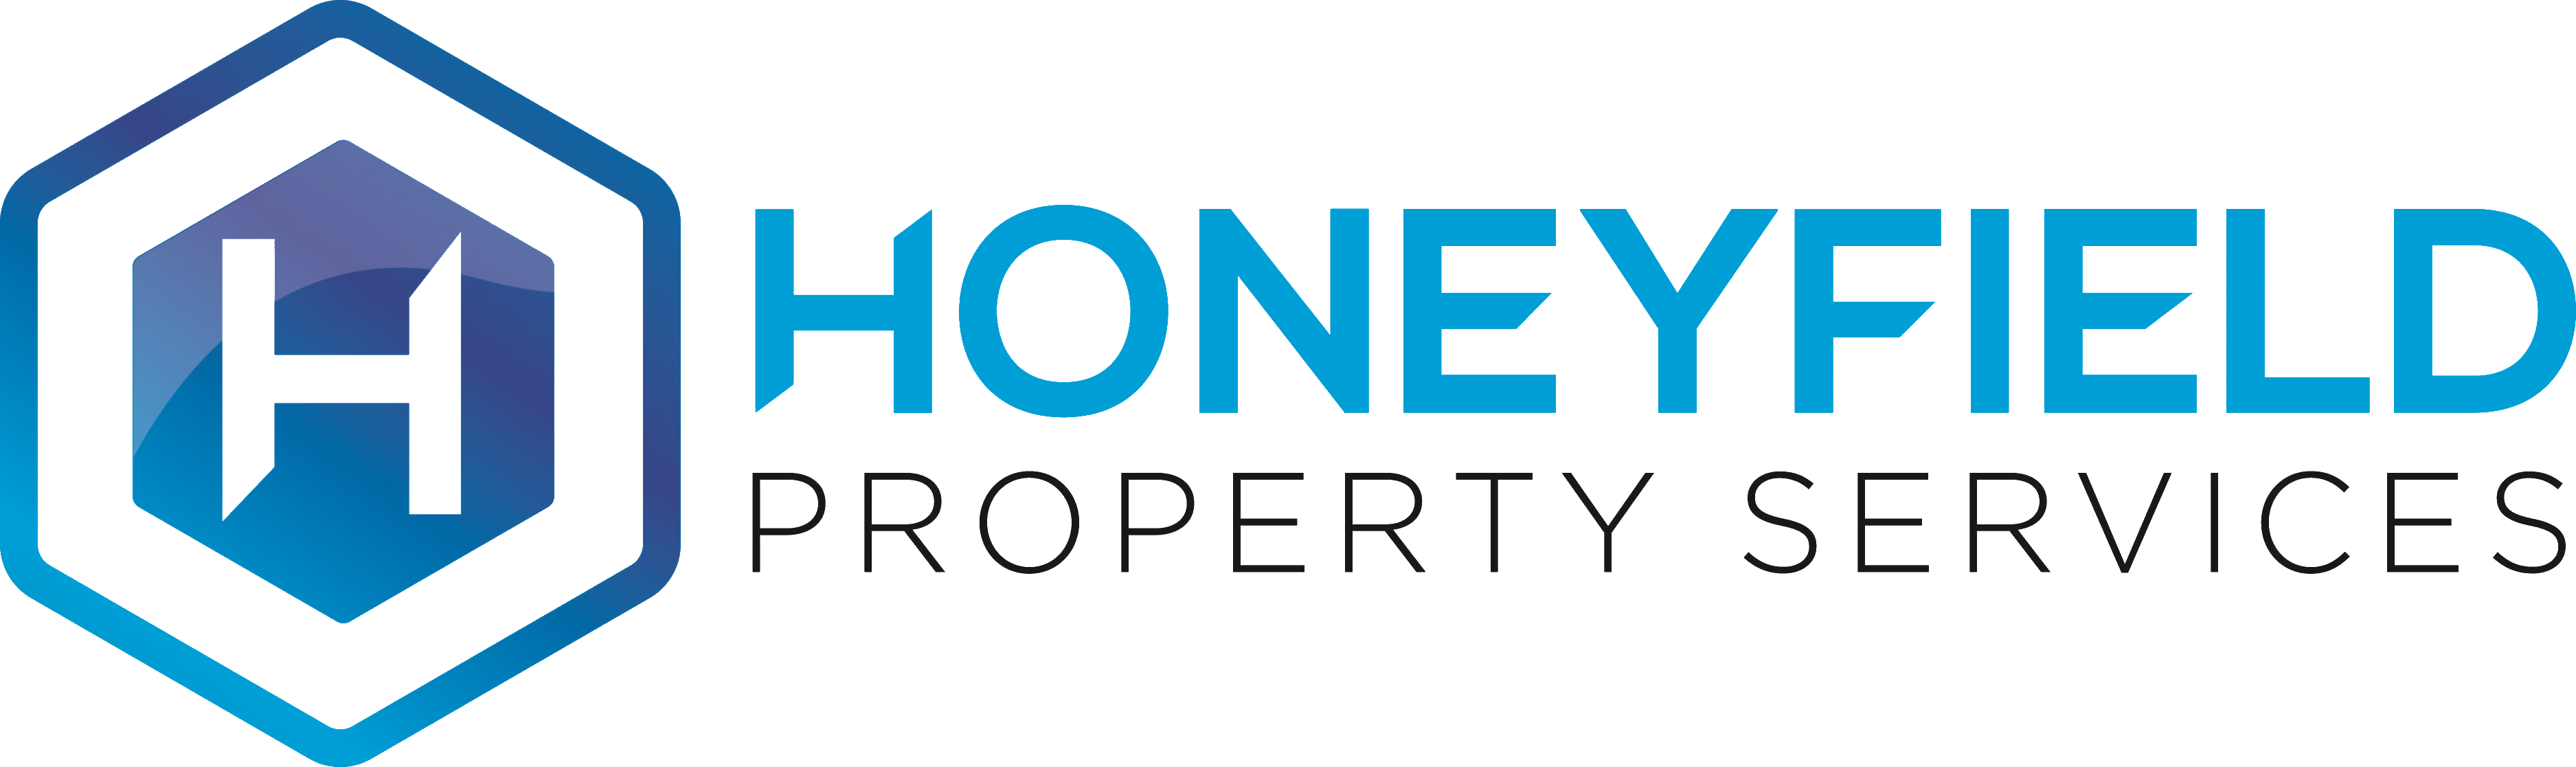 Honeyfield property services logo